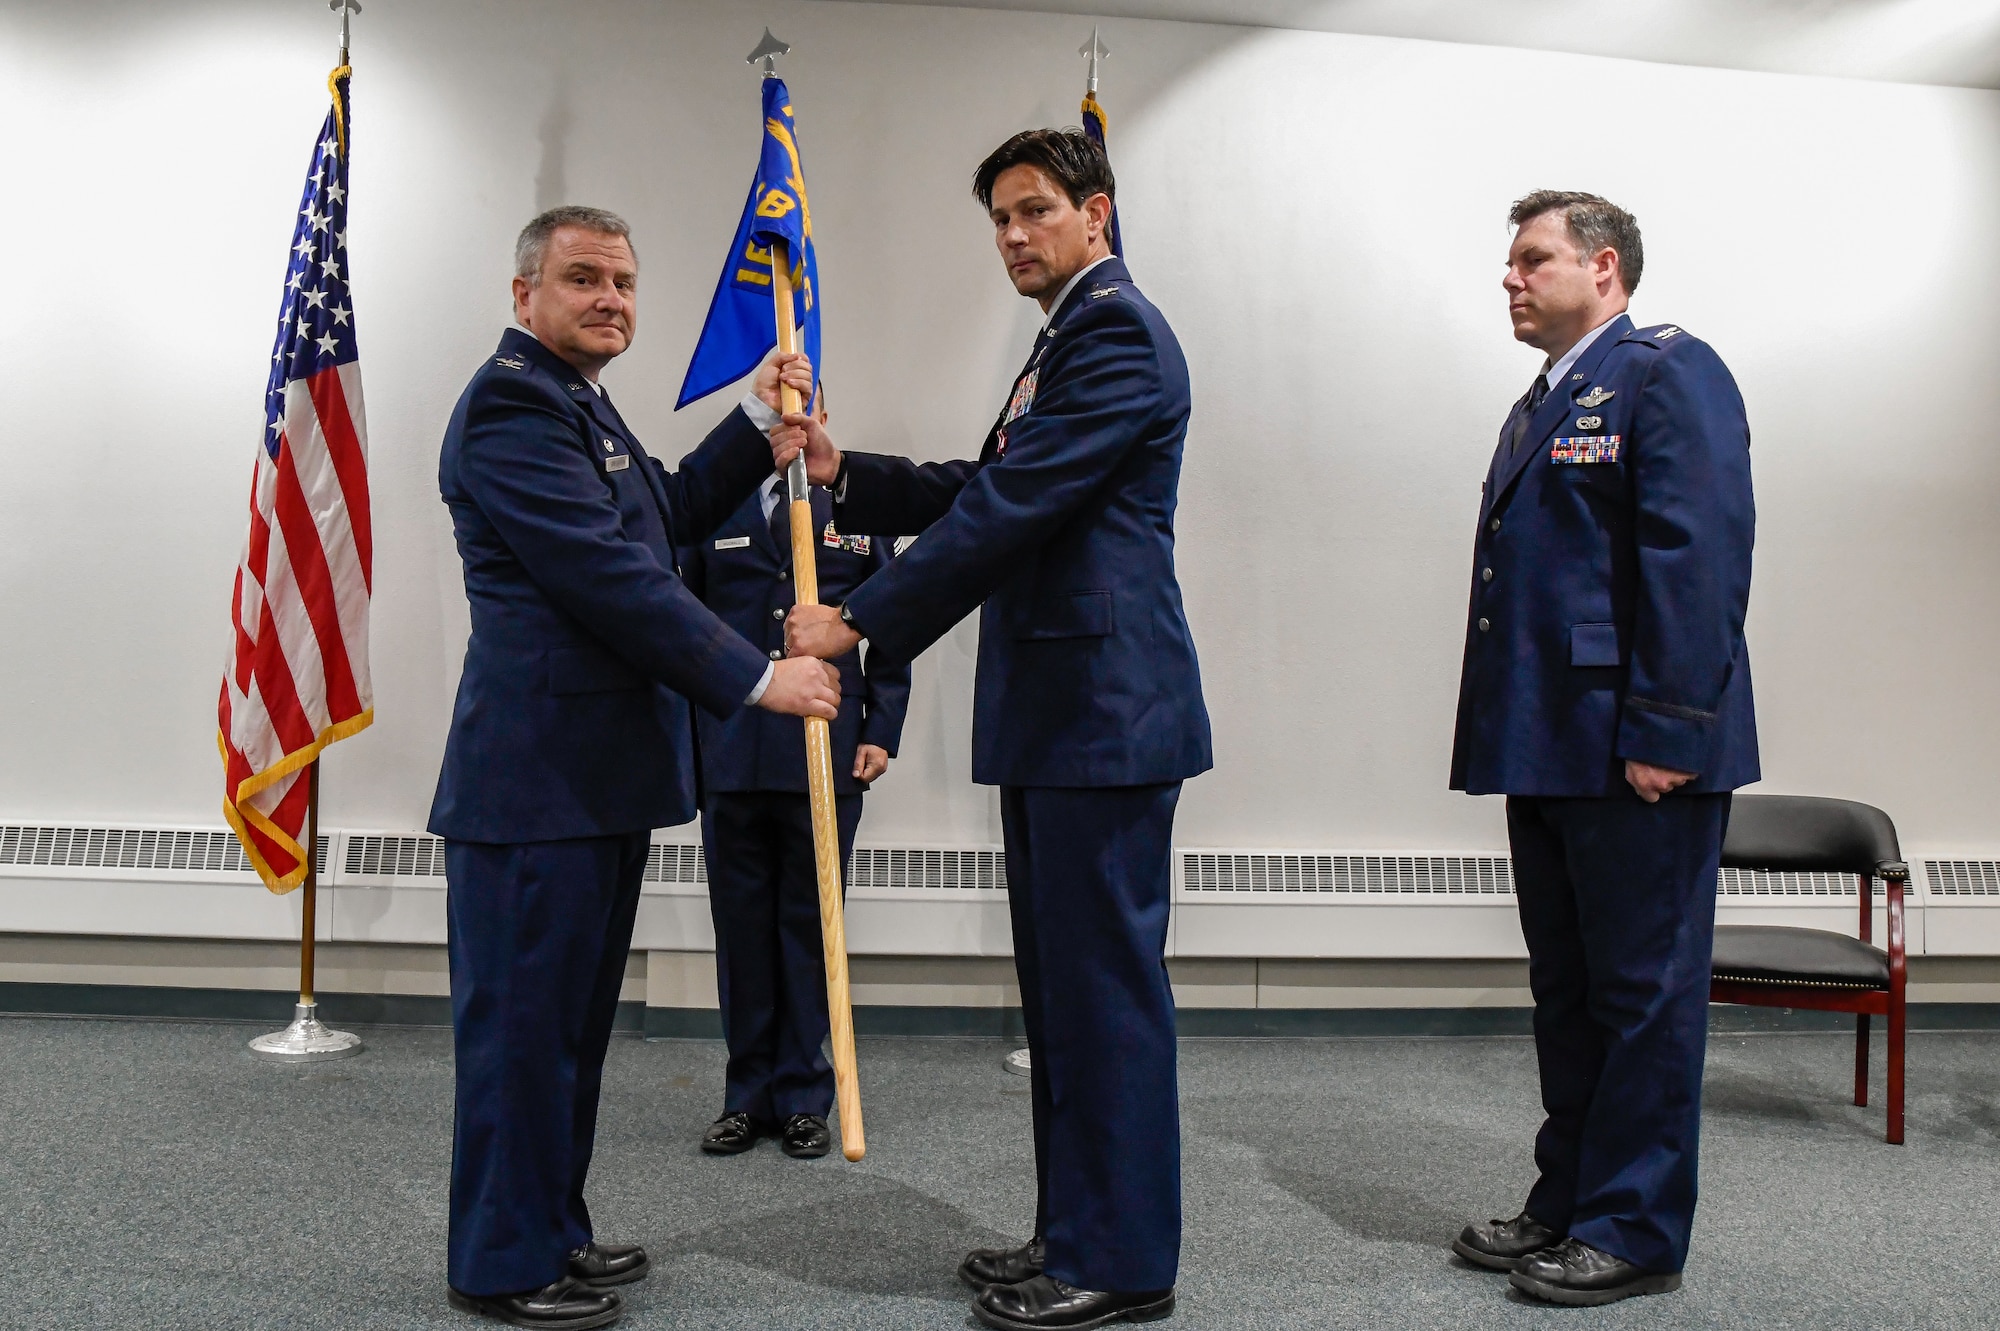 Col. Michael Griesbaum, 168th Wing commander transfers the guidon to Col. Ronald Oliver, 168th Wing Deputy commander during a change of command ceremony August 5, 2023, at Eielson Air Force Base, Alaska. A Change of command ceremony is a military tradition representing the formal transfer of responsibility of a unit from one commanding officer to another. (U.S. Air National Guard photo by Senior Master Sgt. Julie Avey)